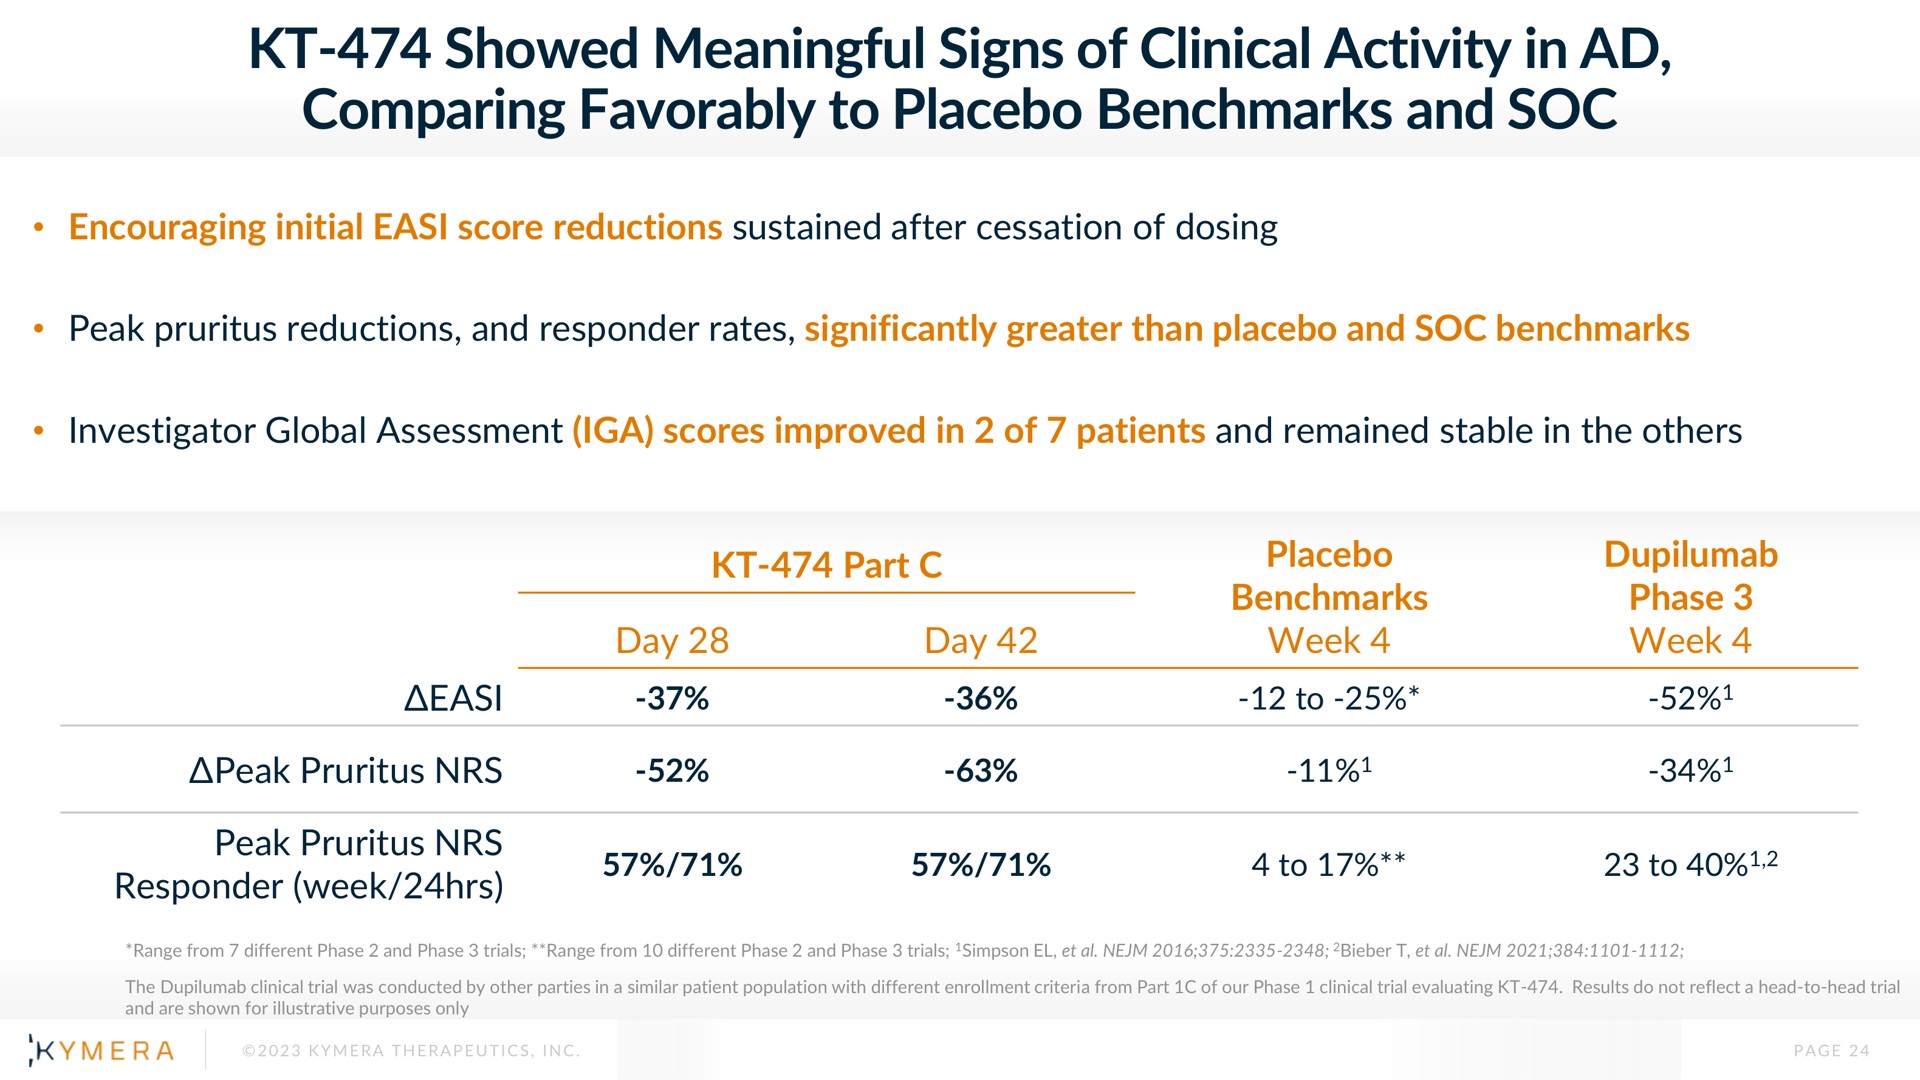 showed meaningful signs of clinical activity in comparing favorably to placebo and soc | Kymera